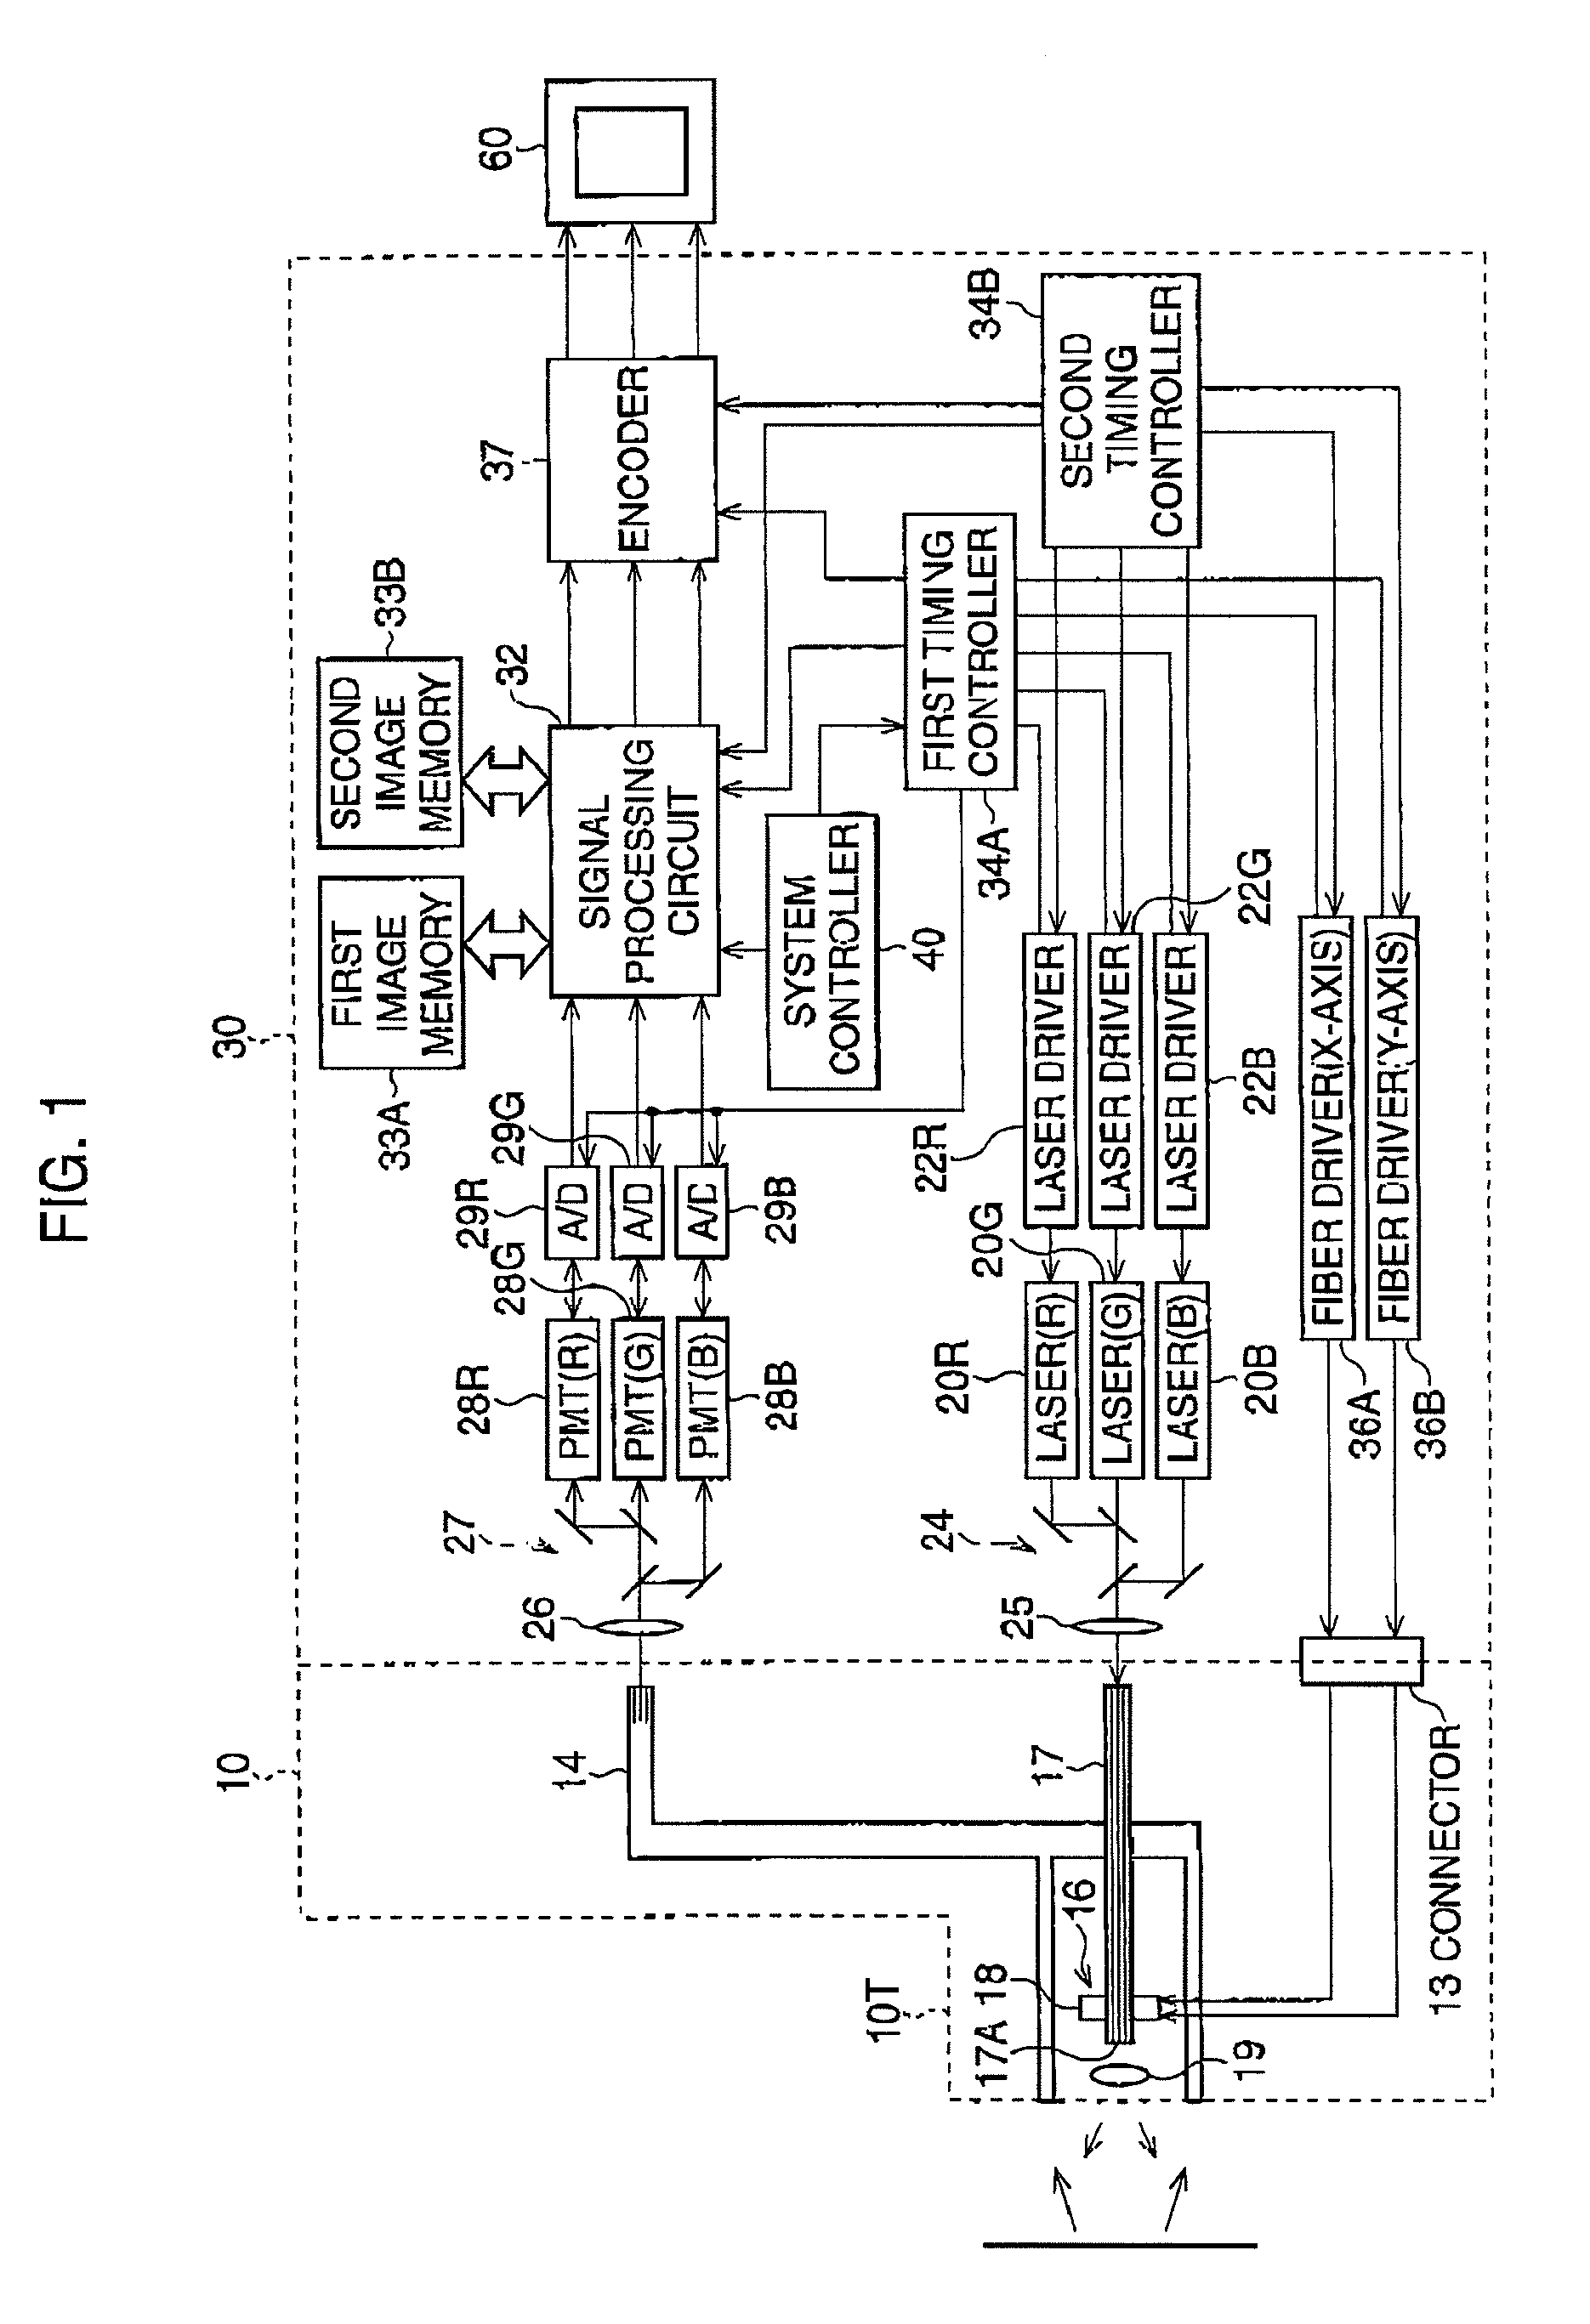 Endoscope system with scanning function